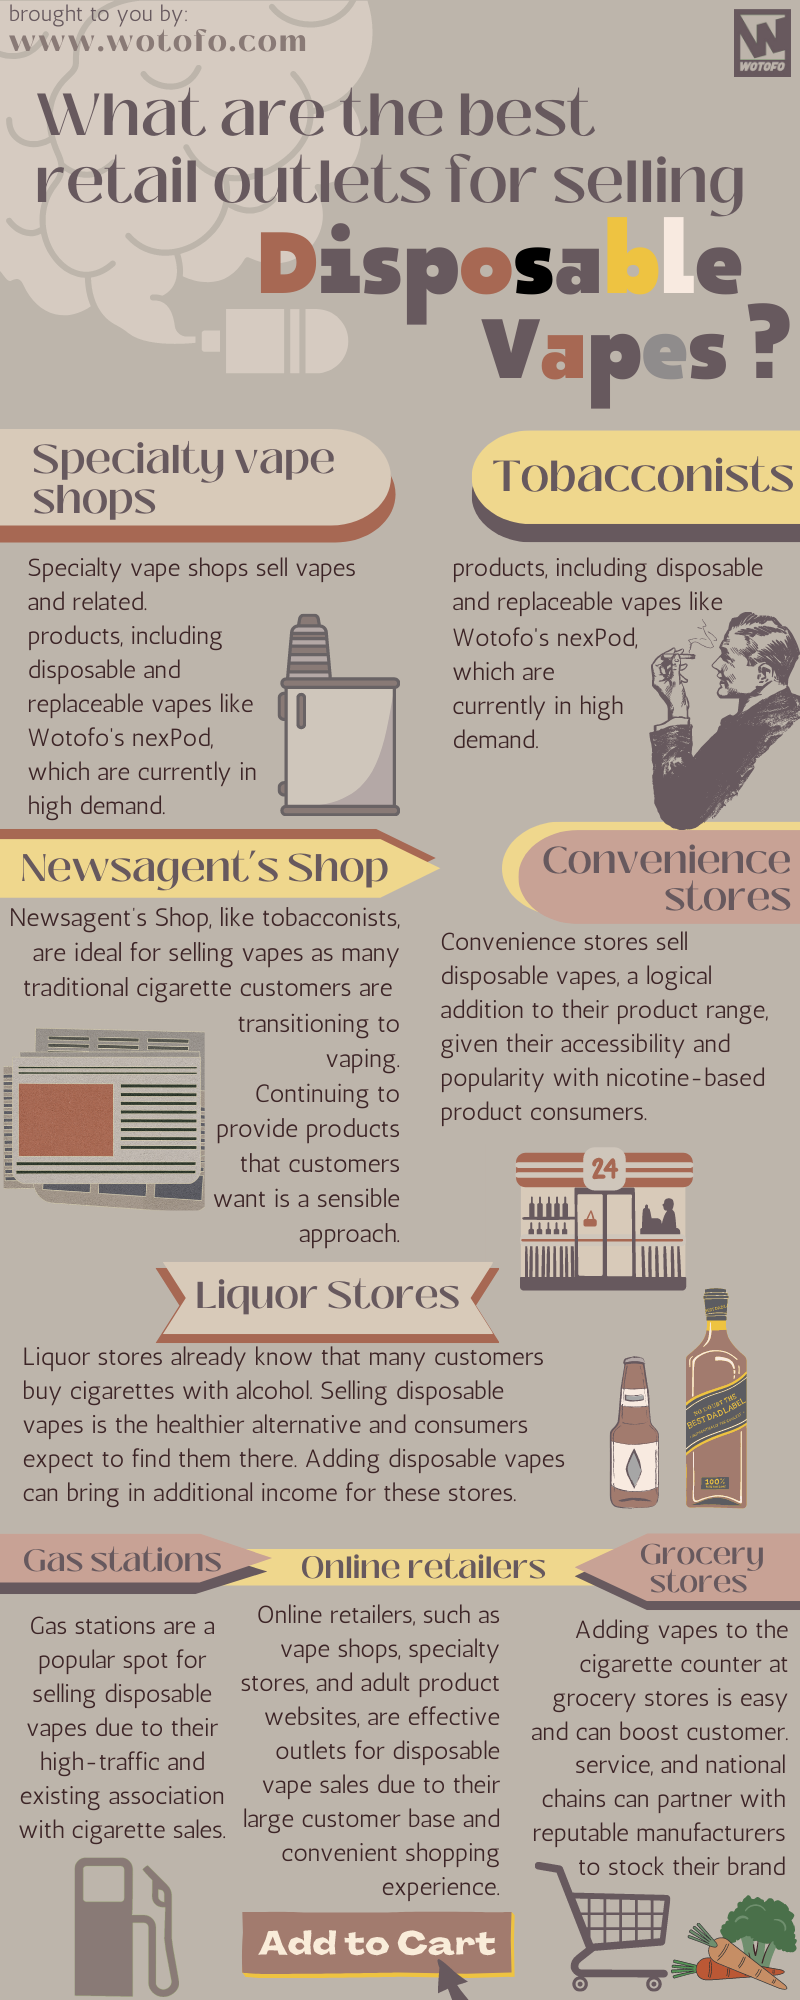 Blog posts 7 types of retail outlets that should sell disposable vapes